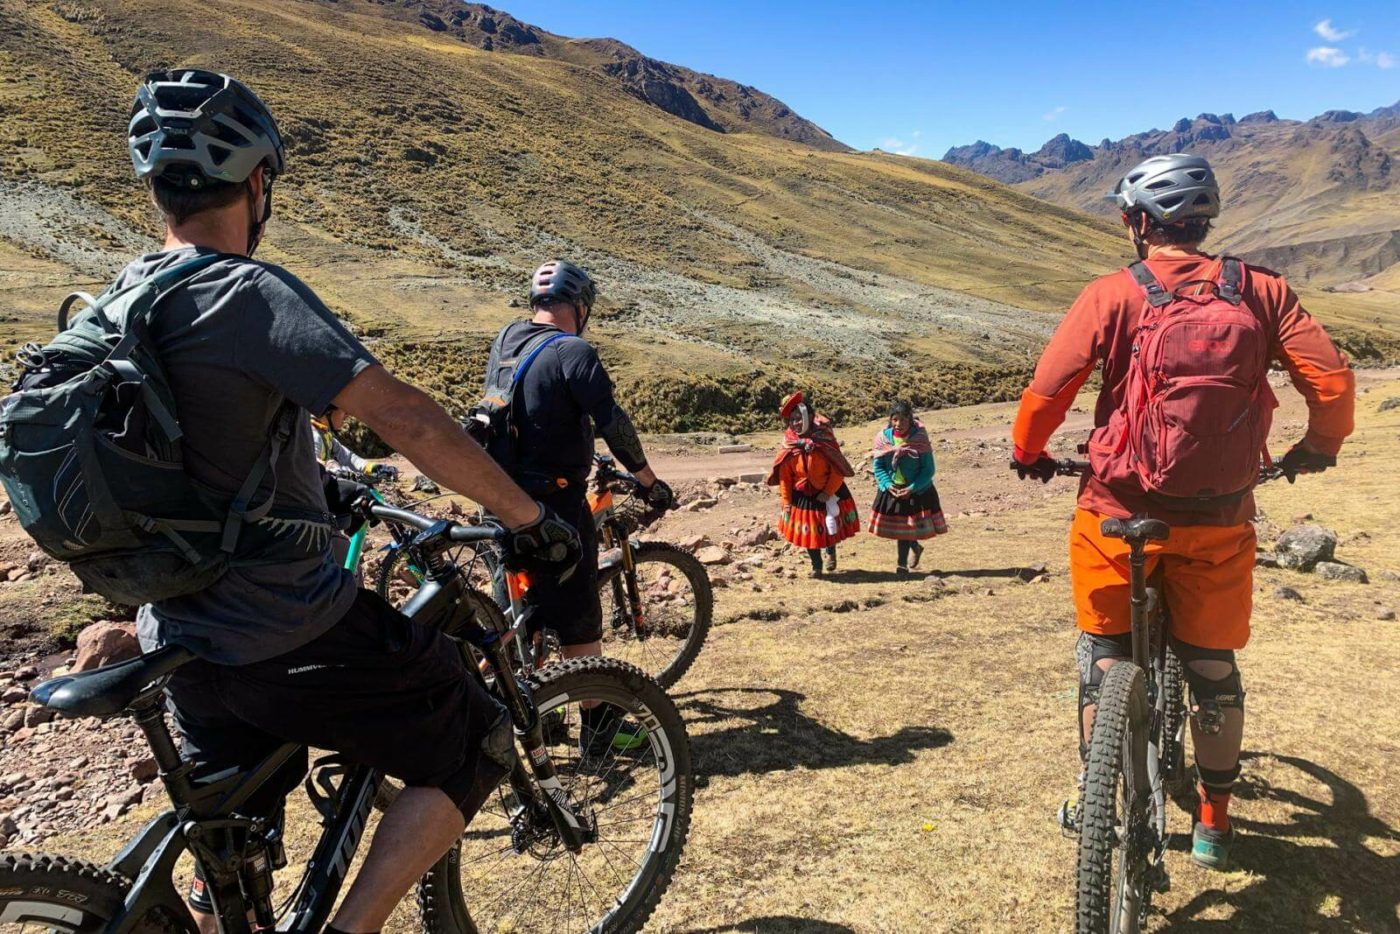 Riders on a mountain biking tour in Peru, stopping to say hello to locals